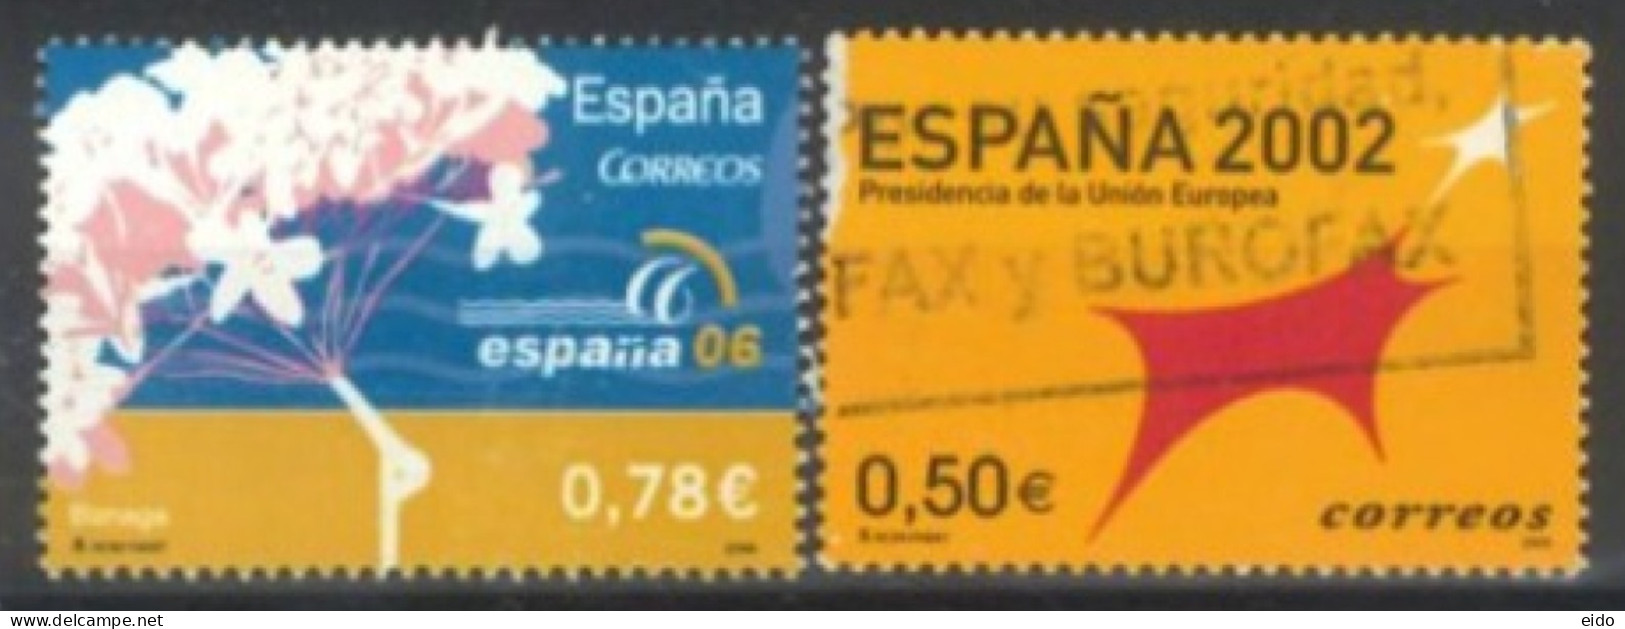 SPAIN, 2002/2006, ESPANA 2006 & 2002 STAMPS SET OF 2, USED. - Used Stamps